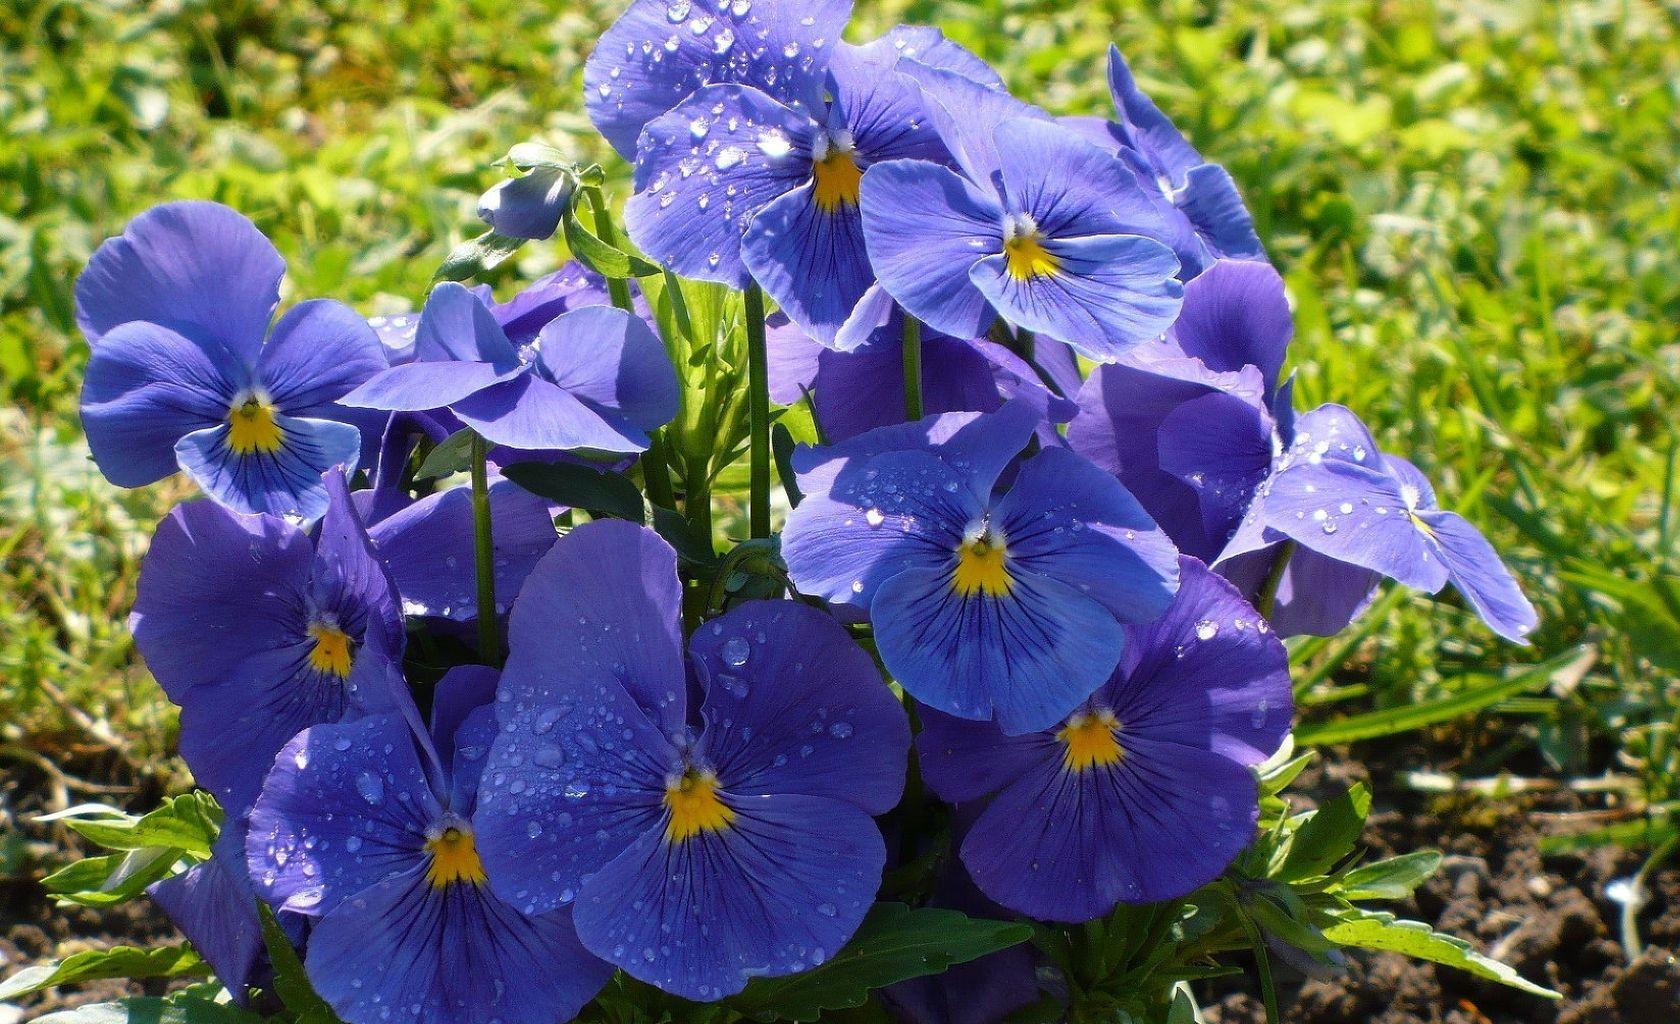 pansies, flowers, drops, close-up, greens, flower bed, flowerbed, freshness, big plan images